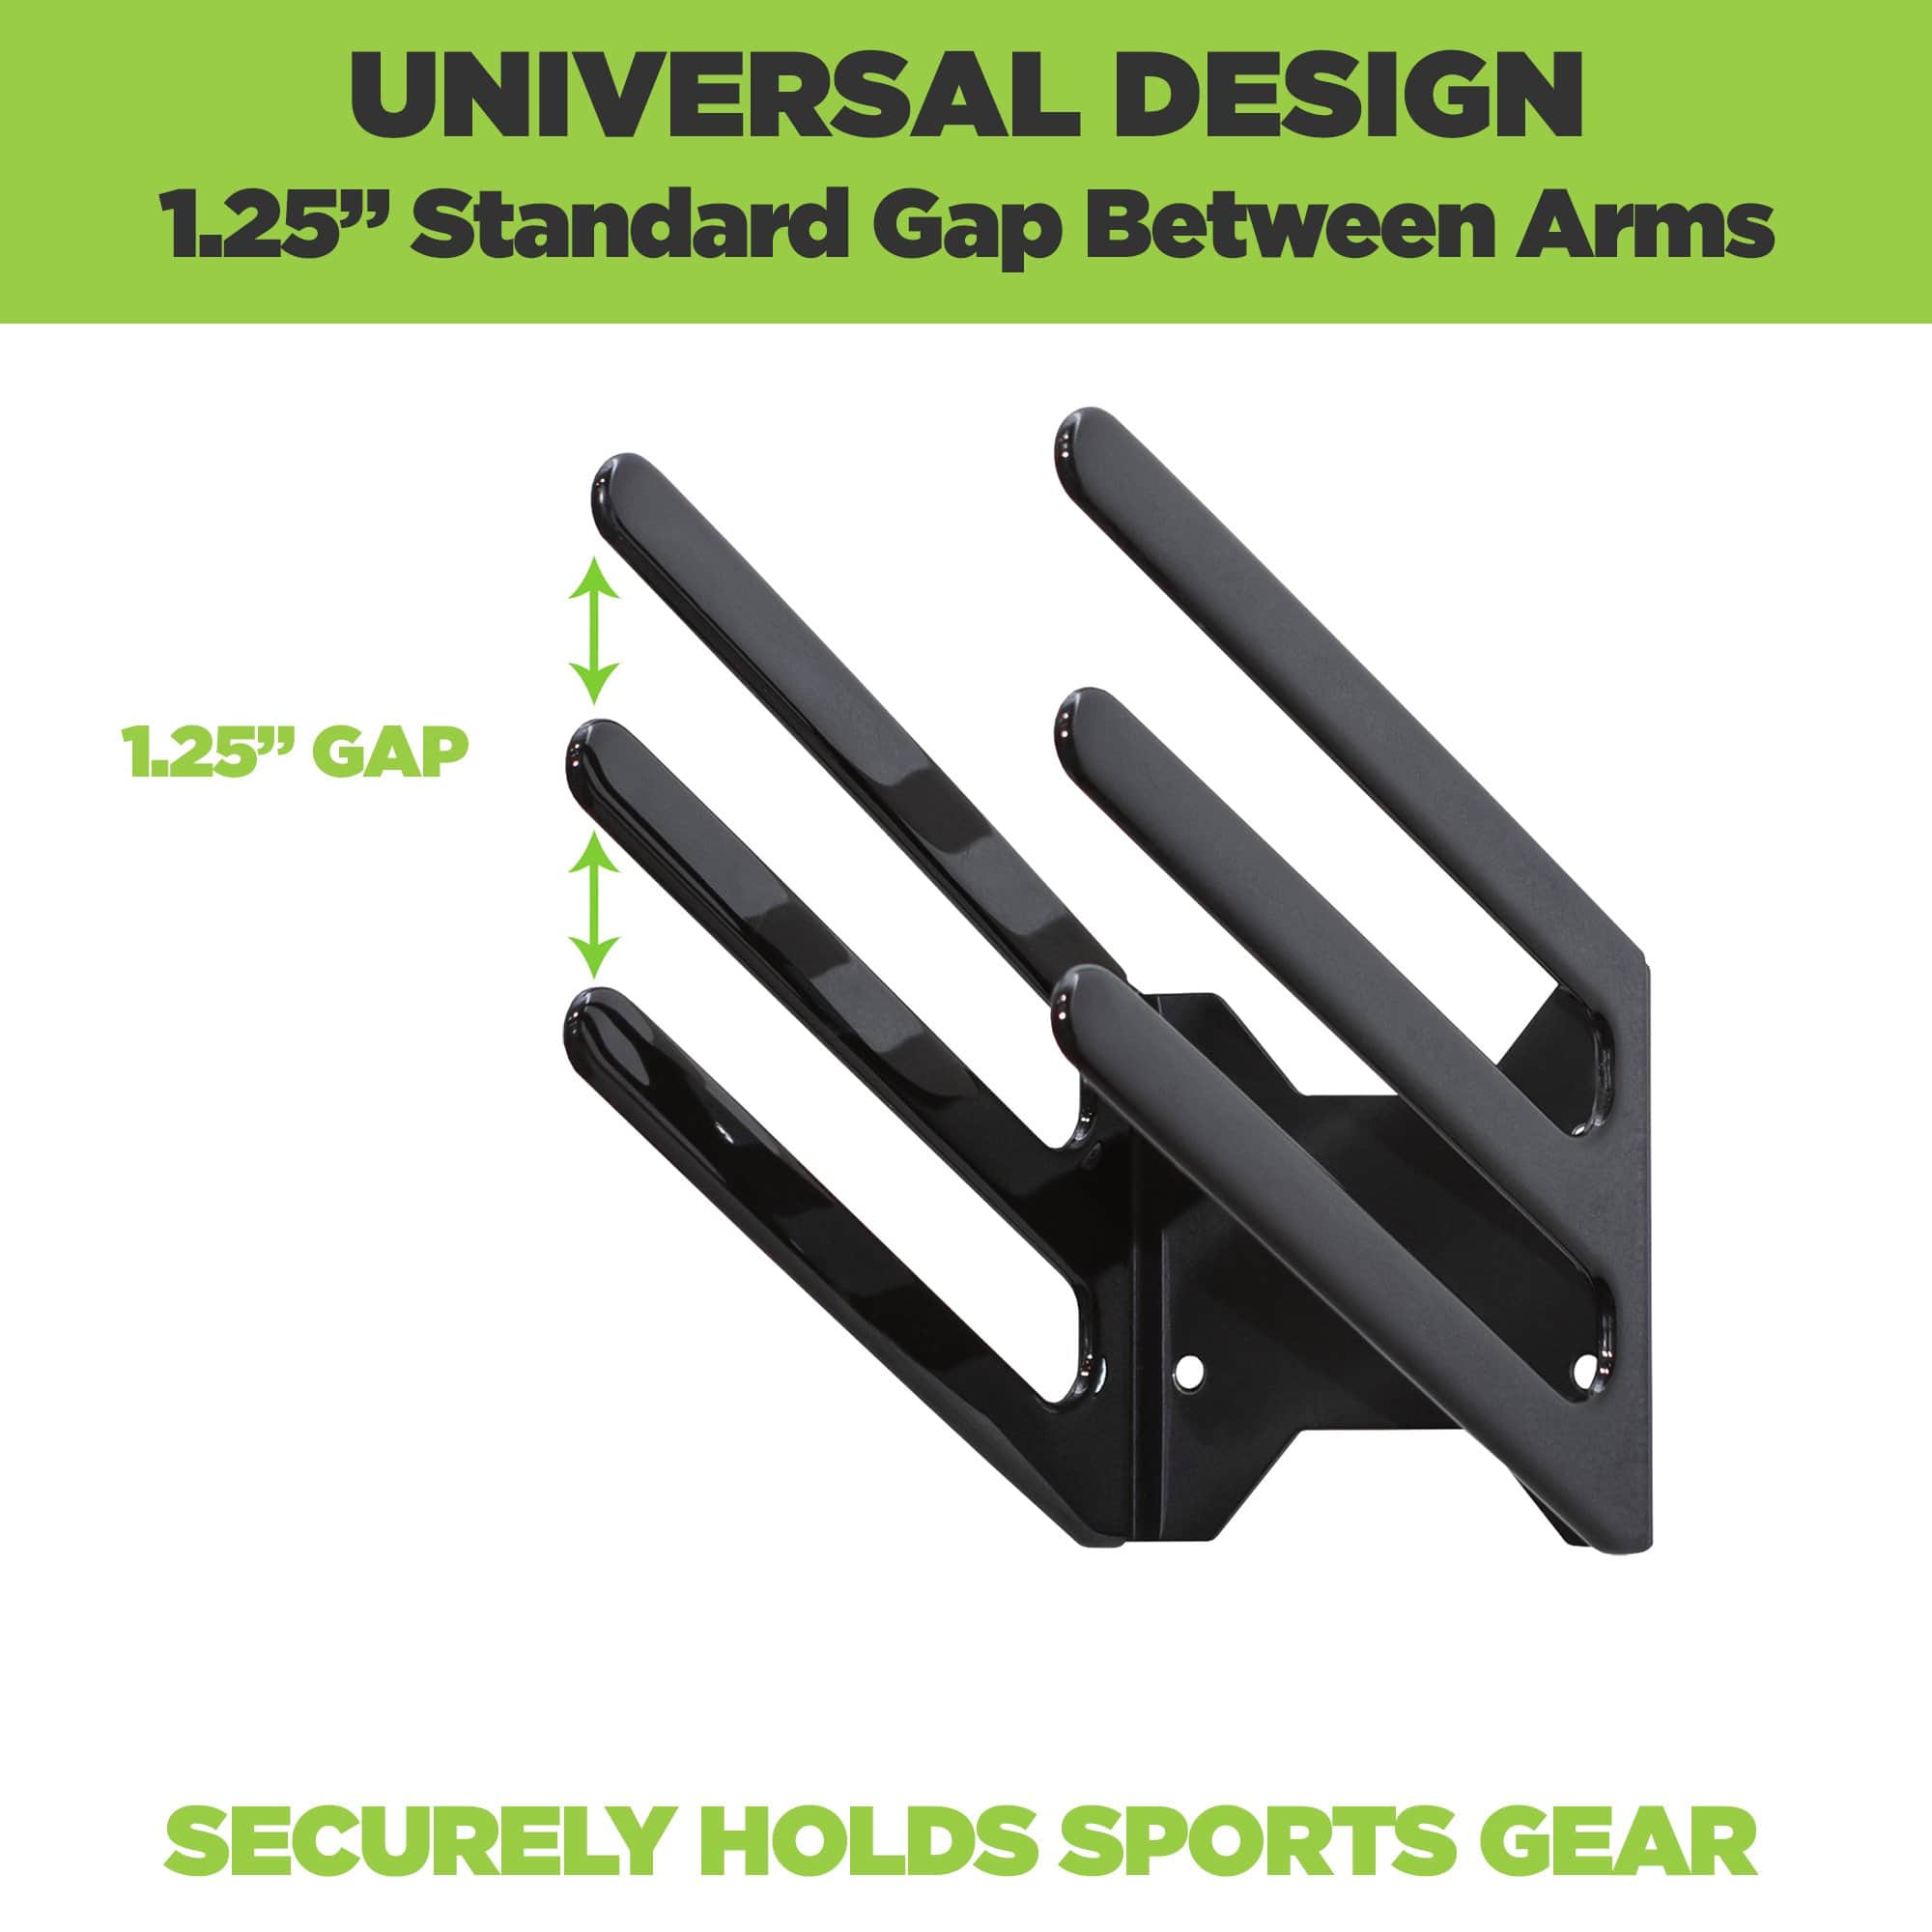 Universal board rack has 3 arms to securely store sports gear including longboards, skimboards and wakeboards.